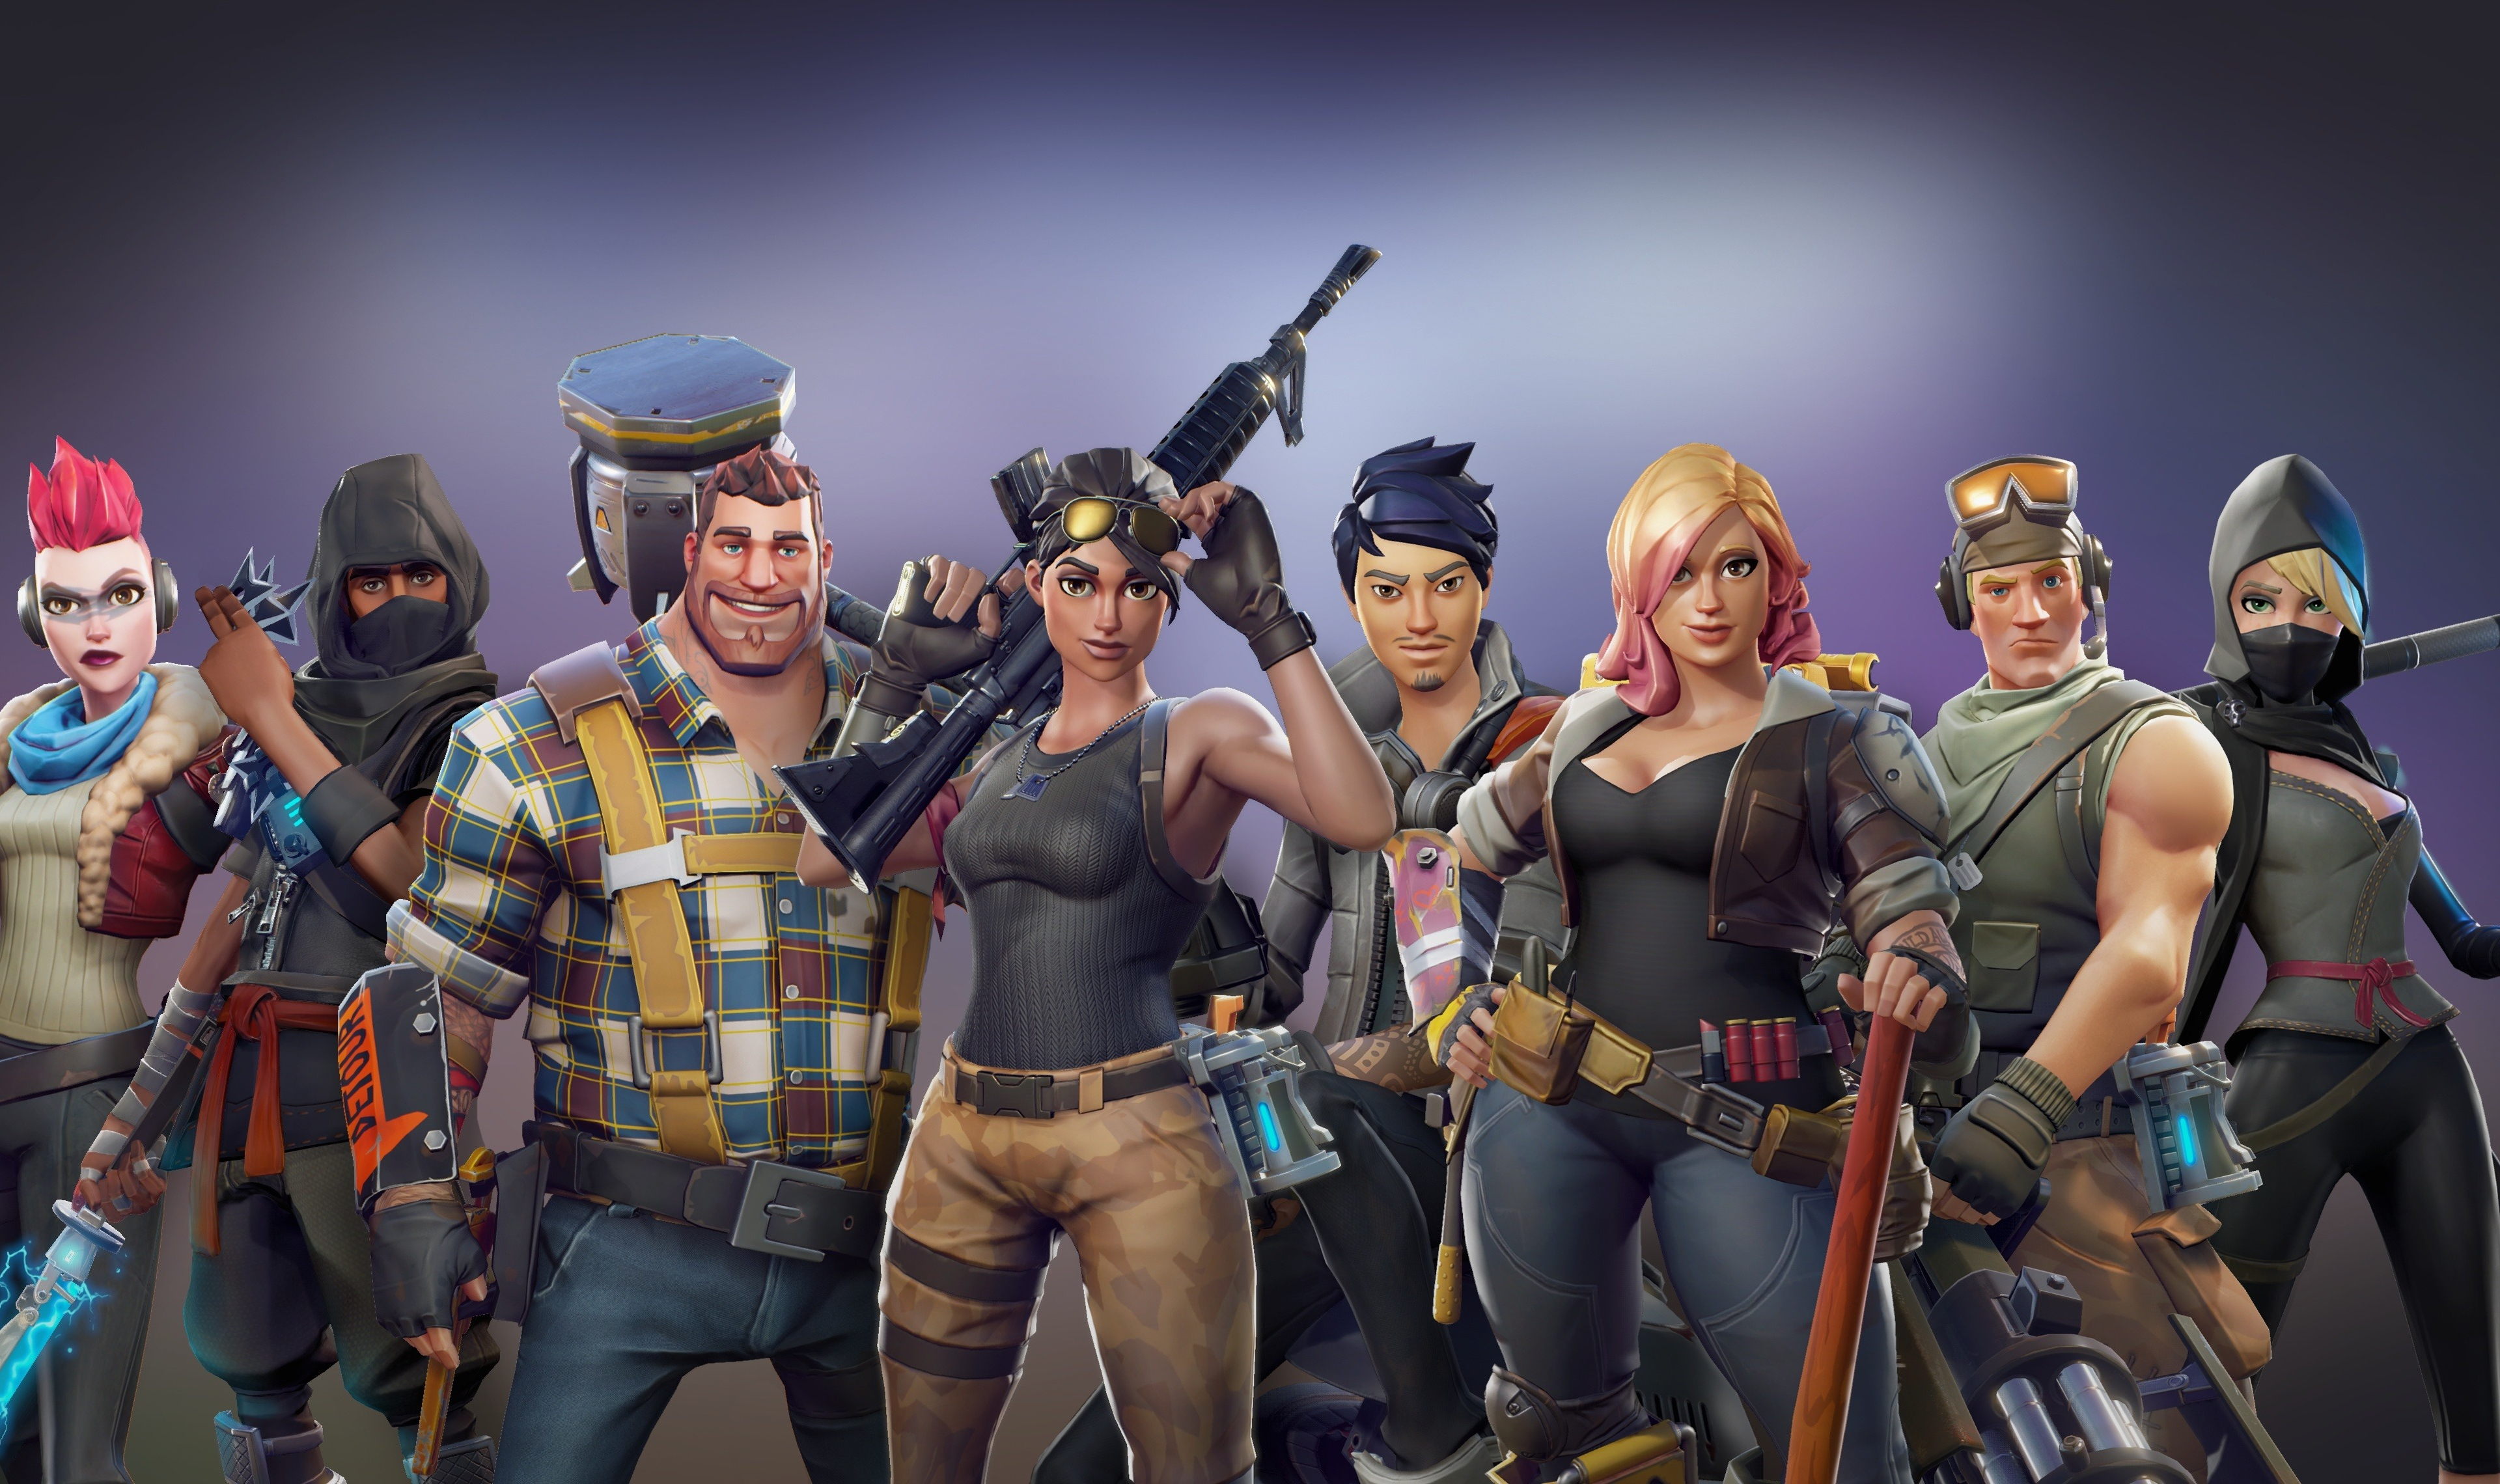 Download 3840x2400 Wallpaper All Characters Video Game Fortnite